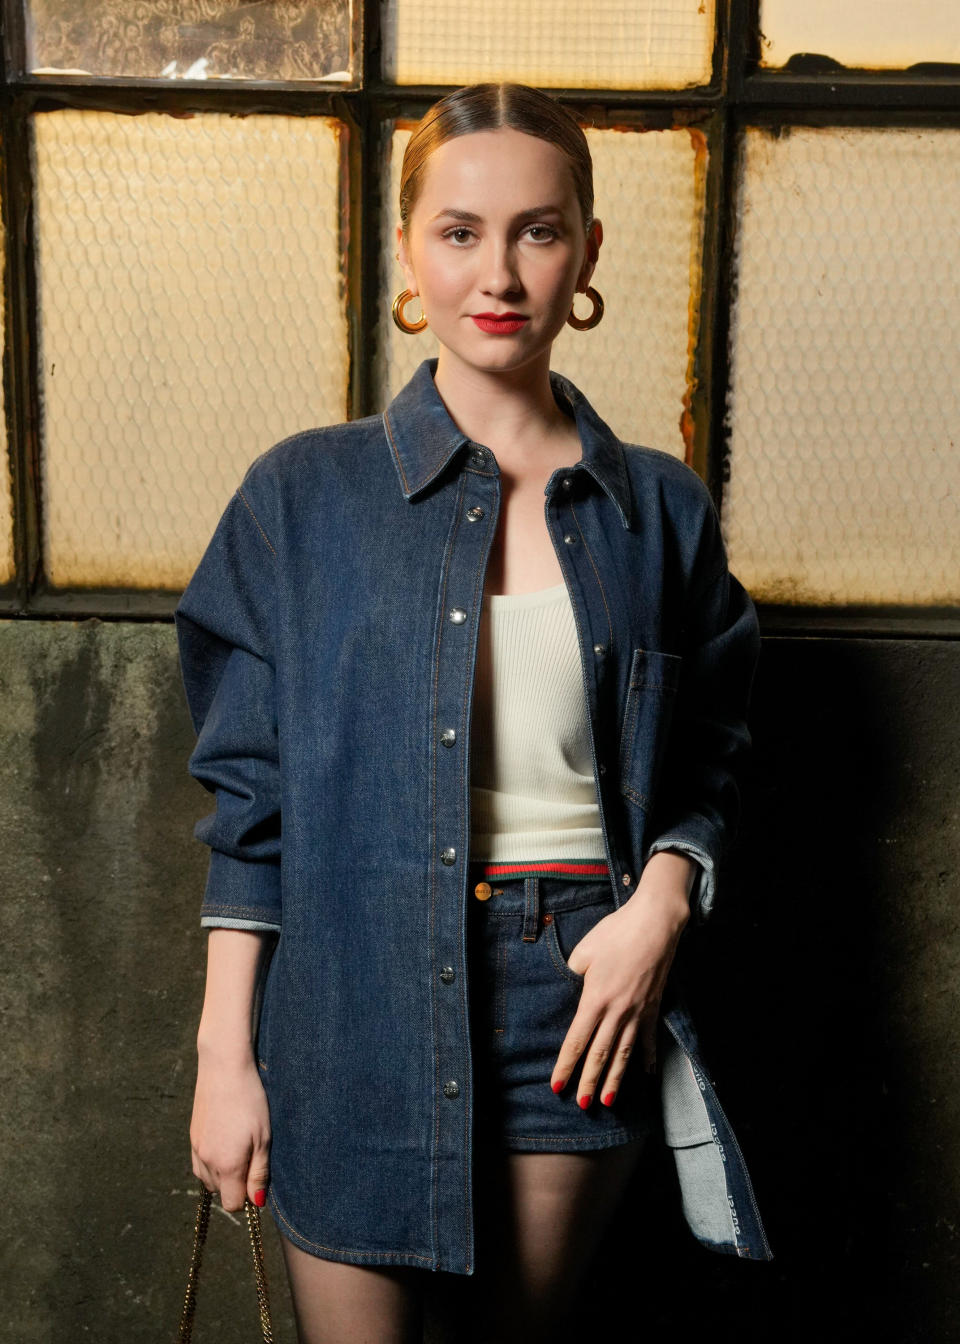 A woman in a stylish, oversized denim button-up shirt and denim shorts, accessorized with large gold hoop earrings, stands confidently in front of a textured window